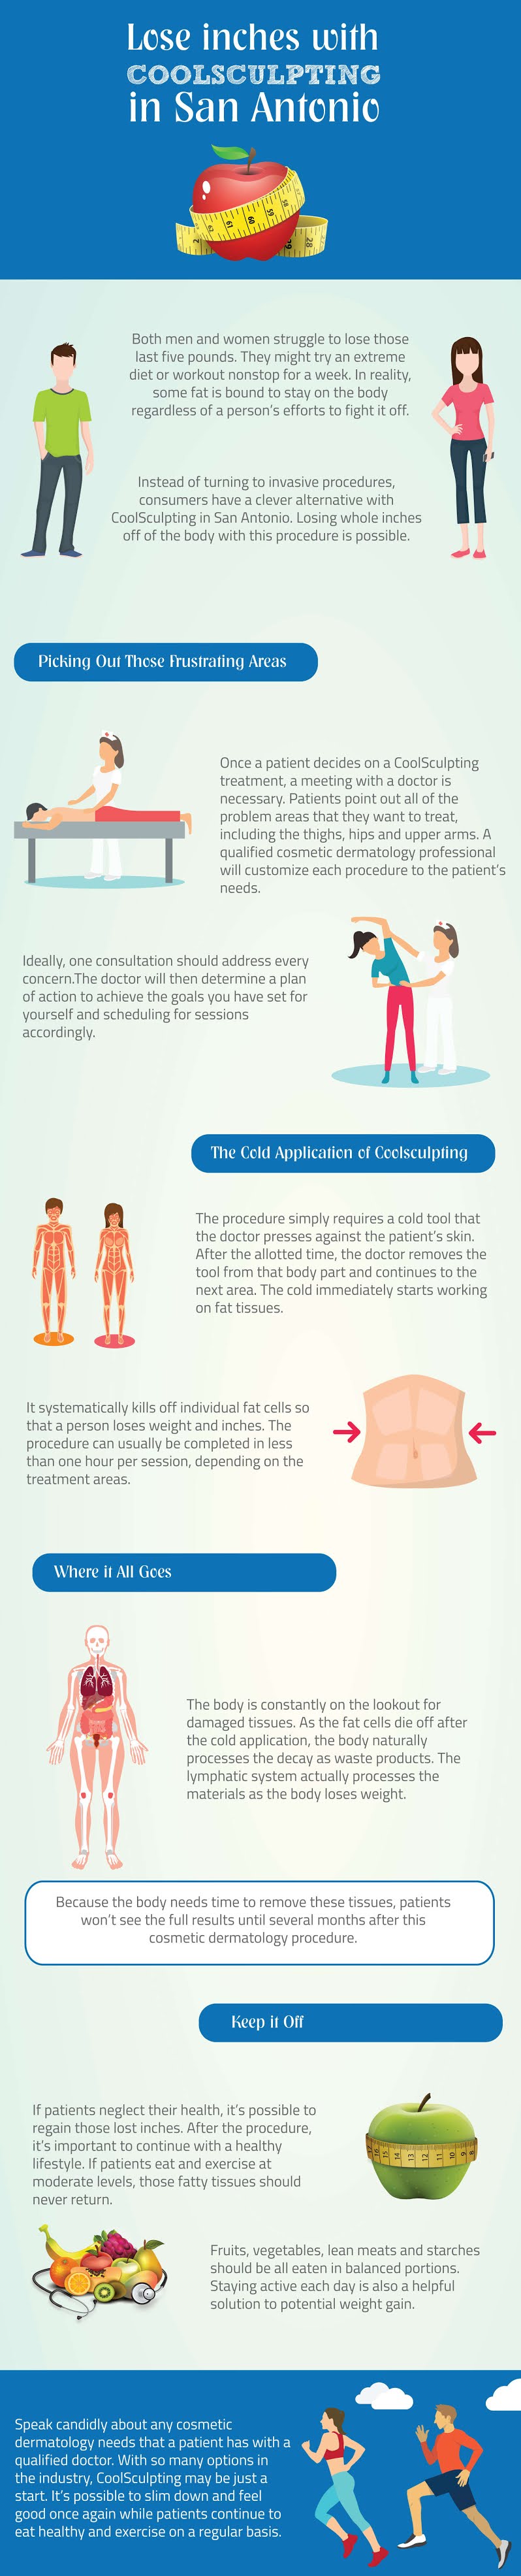 Lose Inches With Coolsculpting in San Antonio #infographic